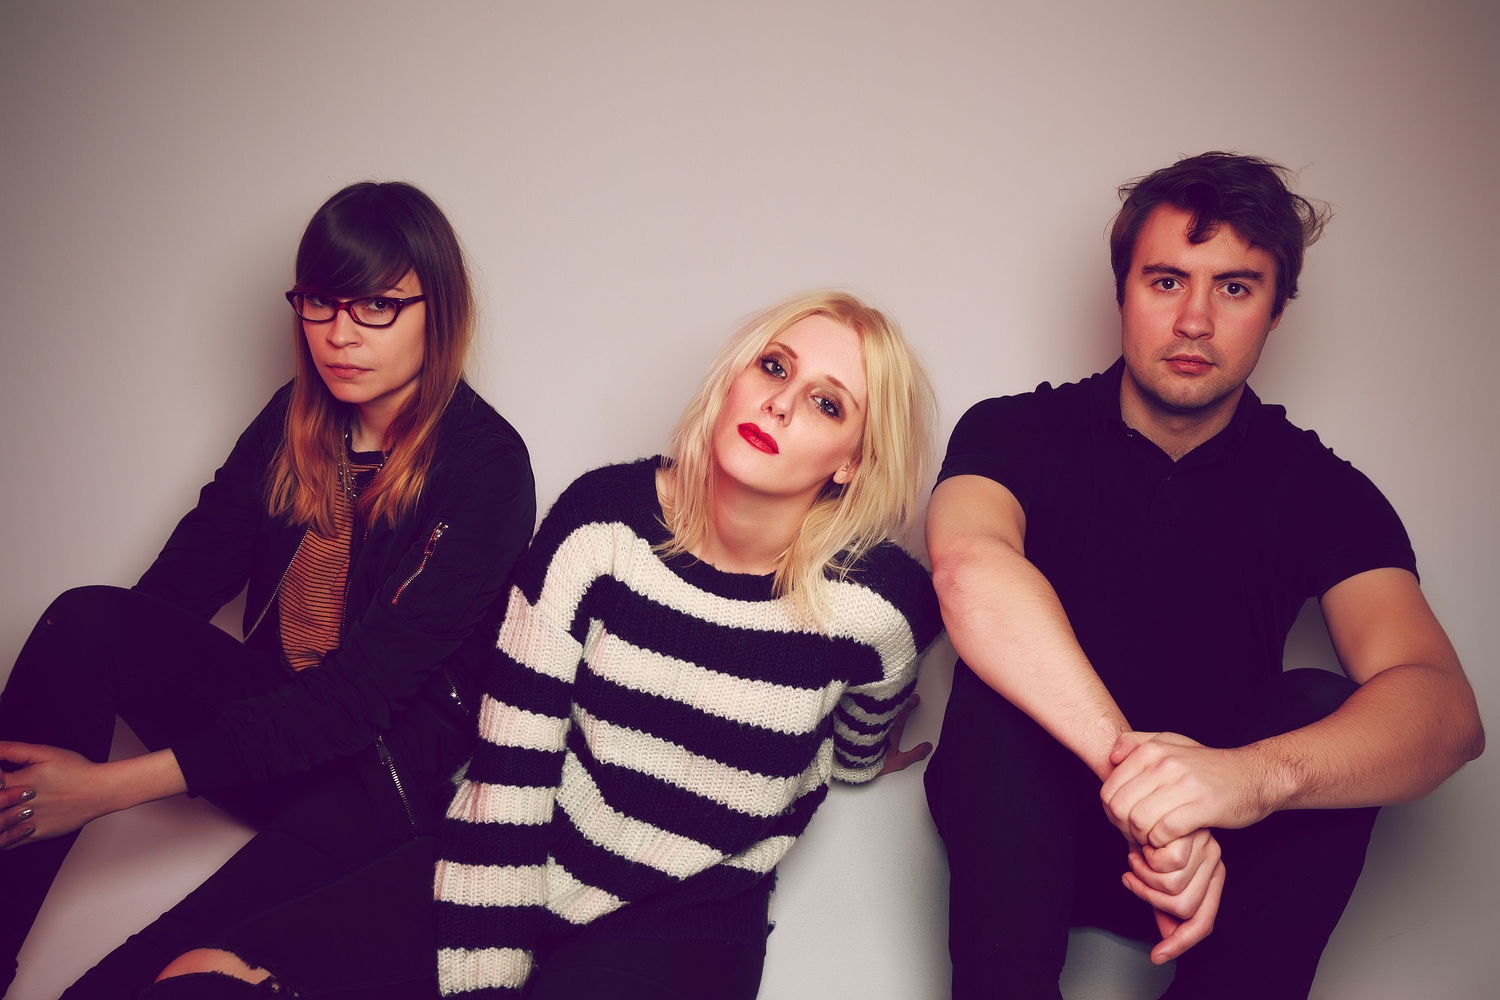 White Lung’s ‘Kiss Me When I Bleed’ gives no breathing space